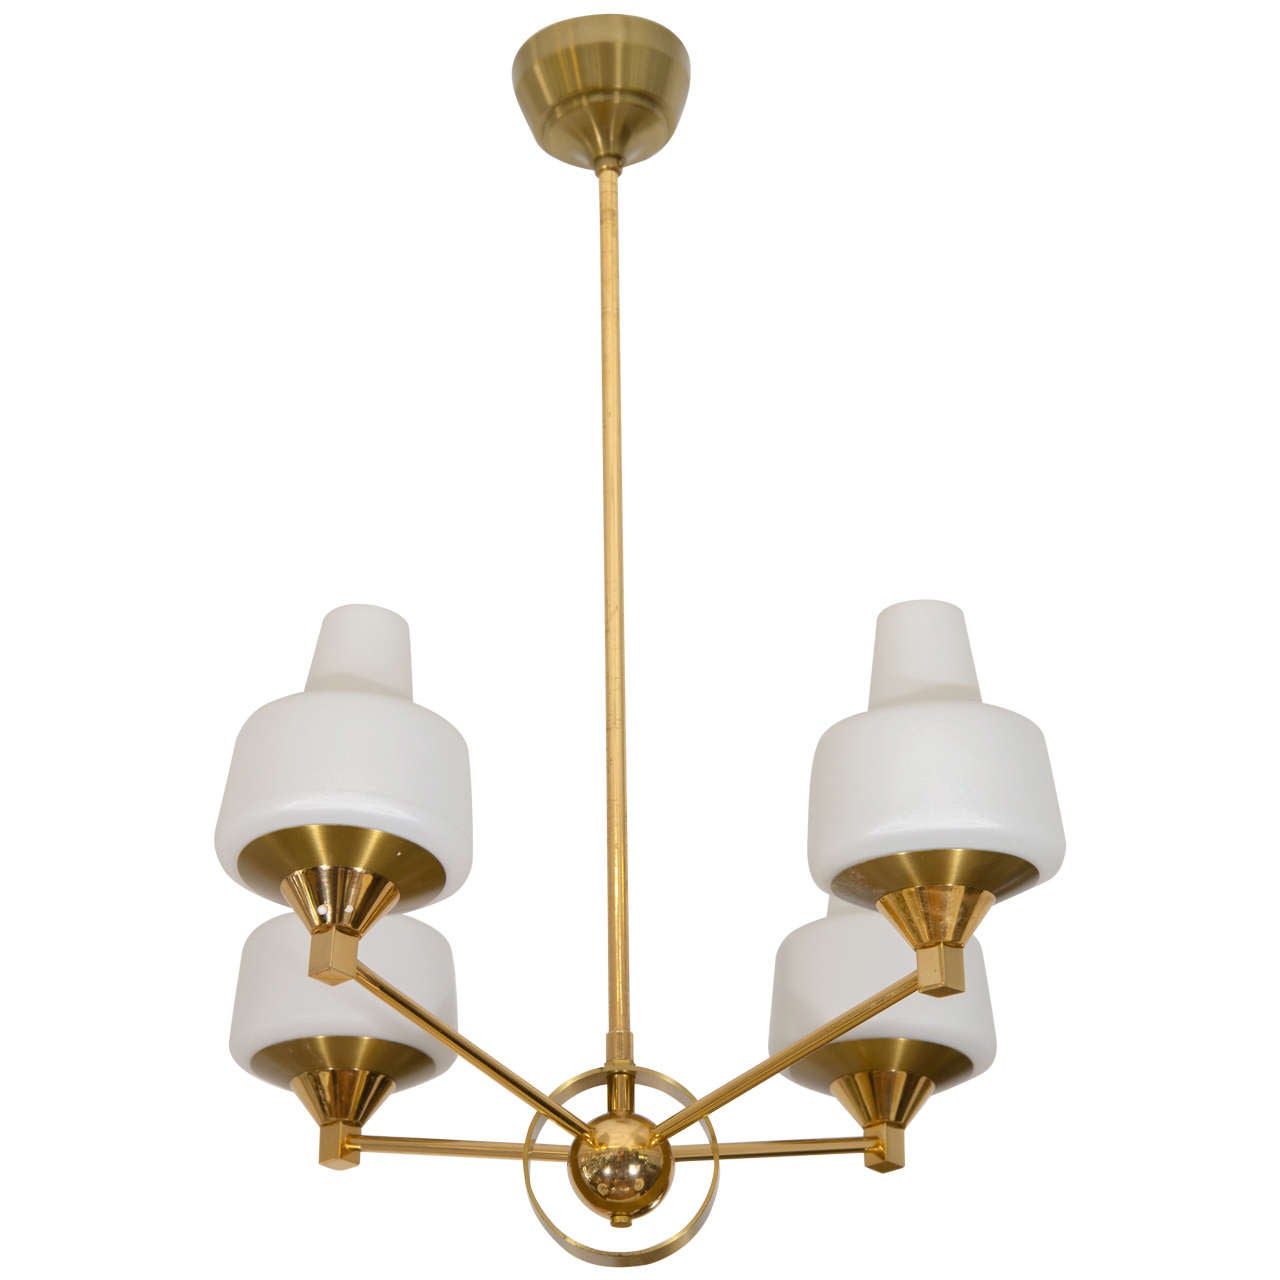 Midcentury Brass and Frosted Glass, Four-Arm Pendant Light For Sale